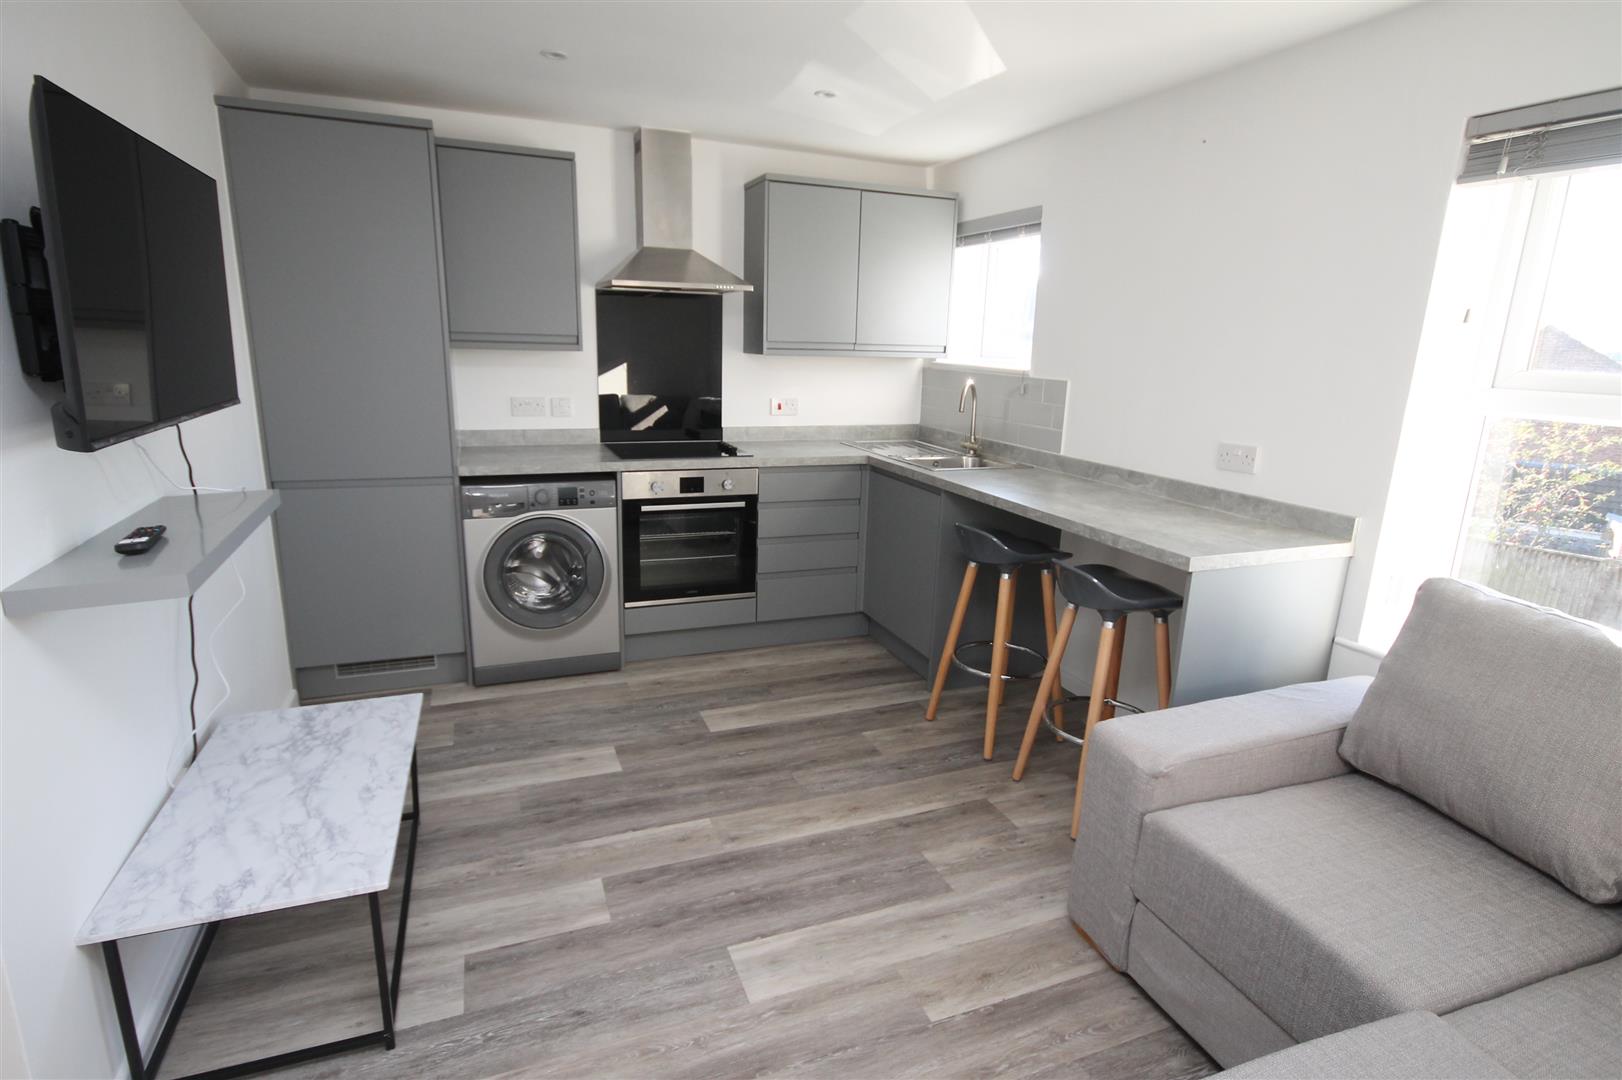 1 bed flat to rent in Park Hill, Bristol - Property Image 1